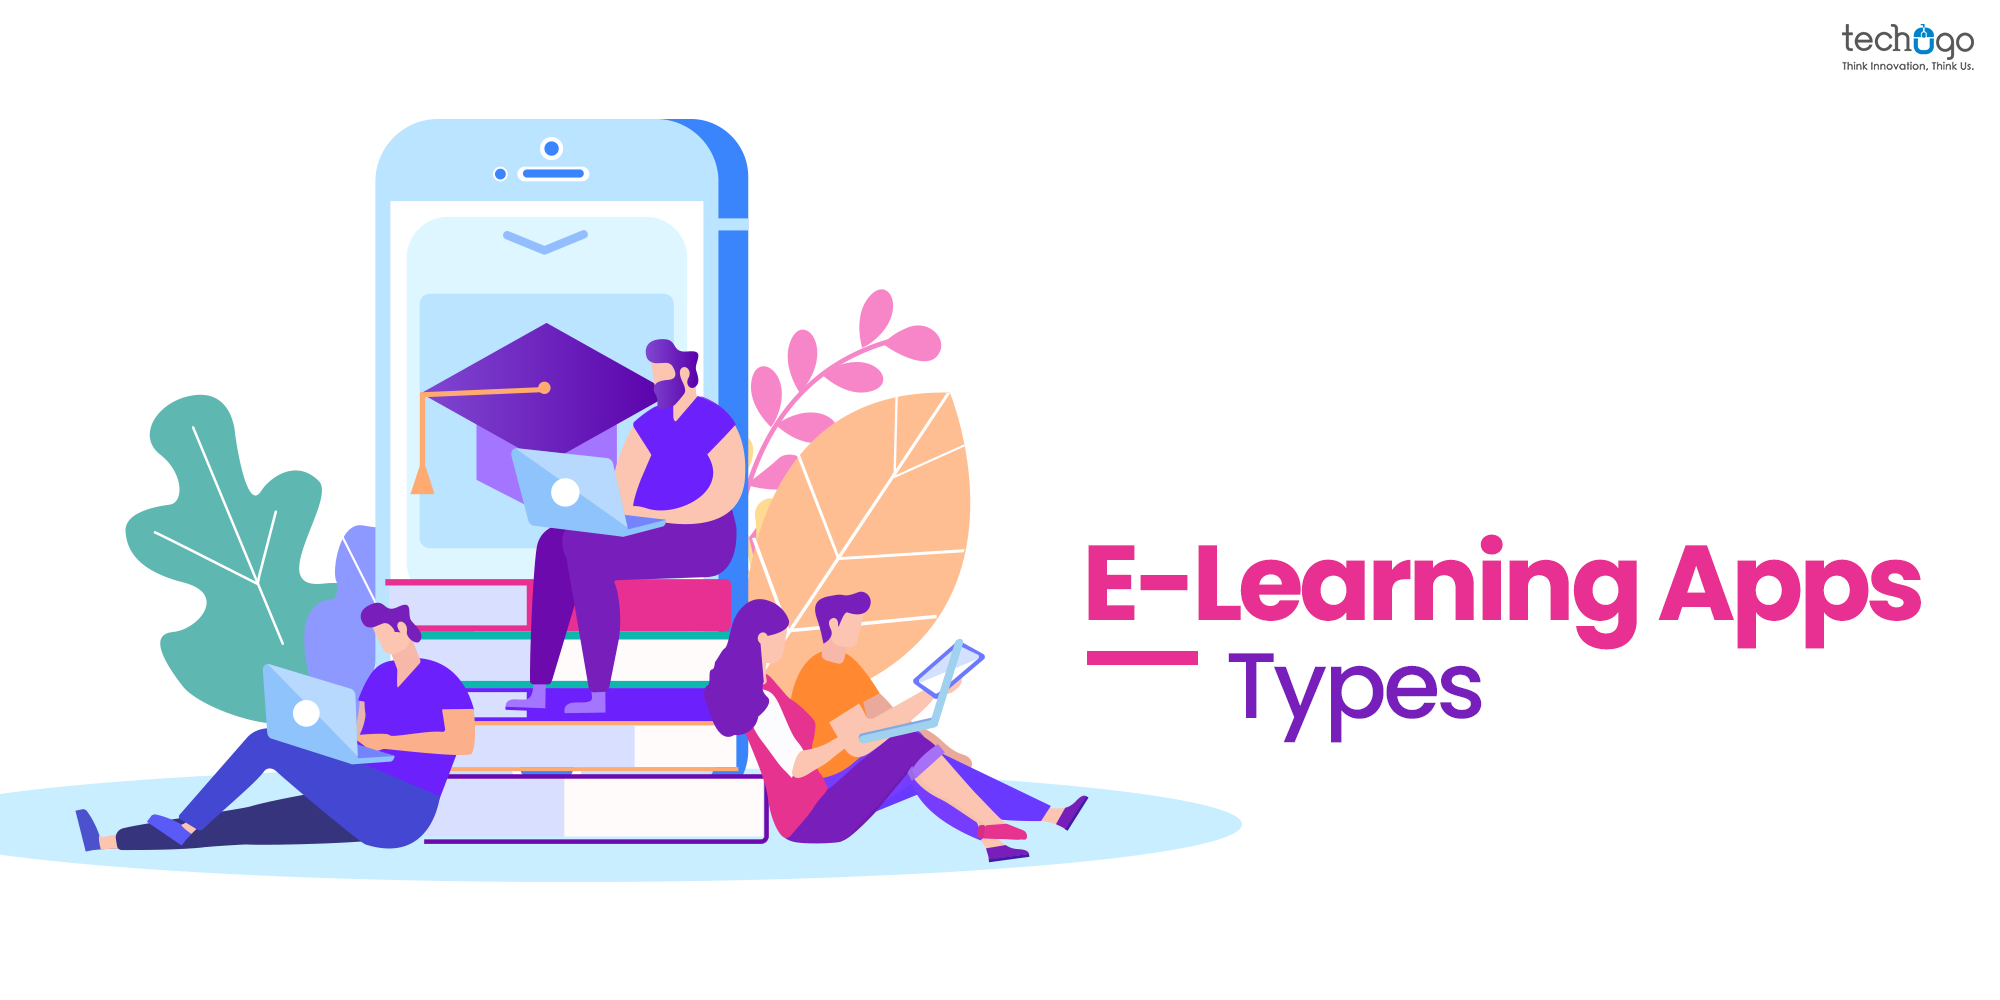 E-Learning Apps Types